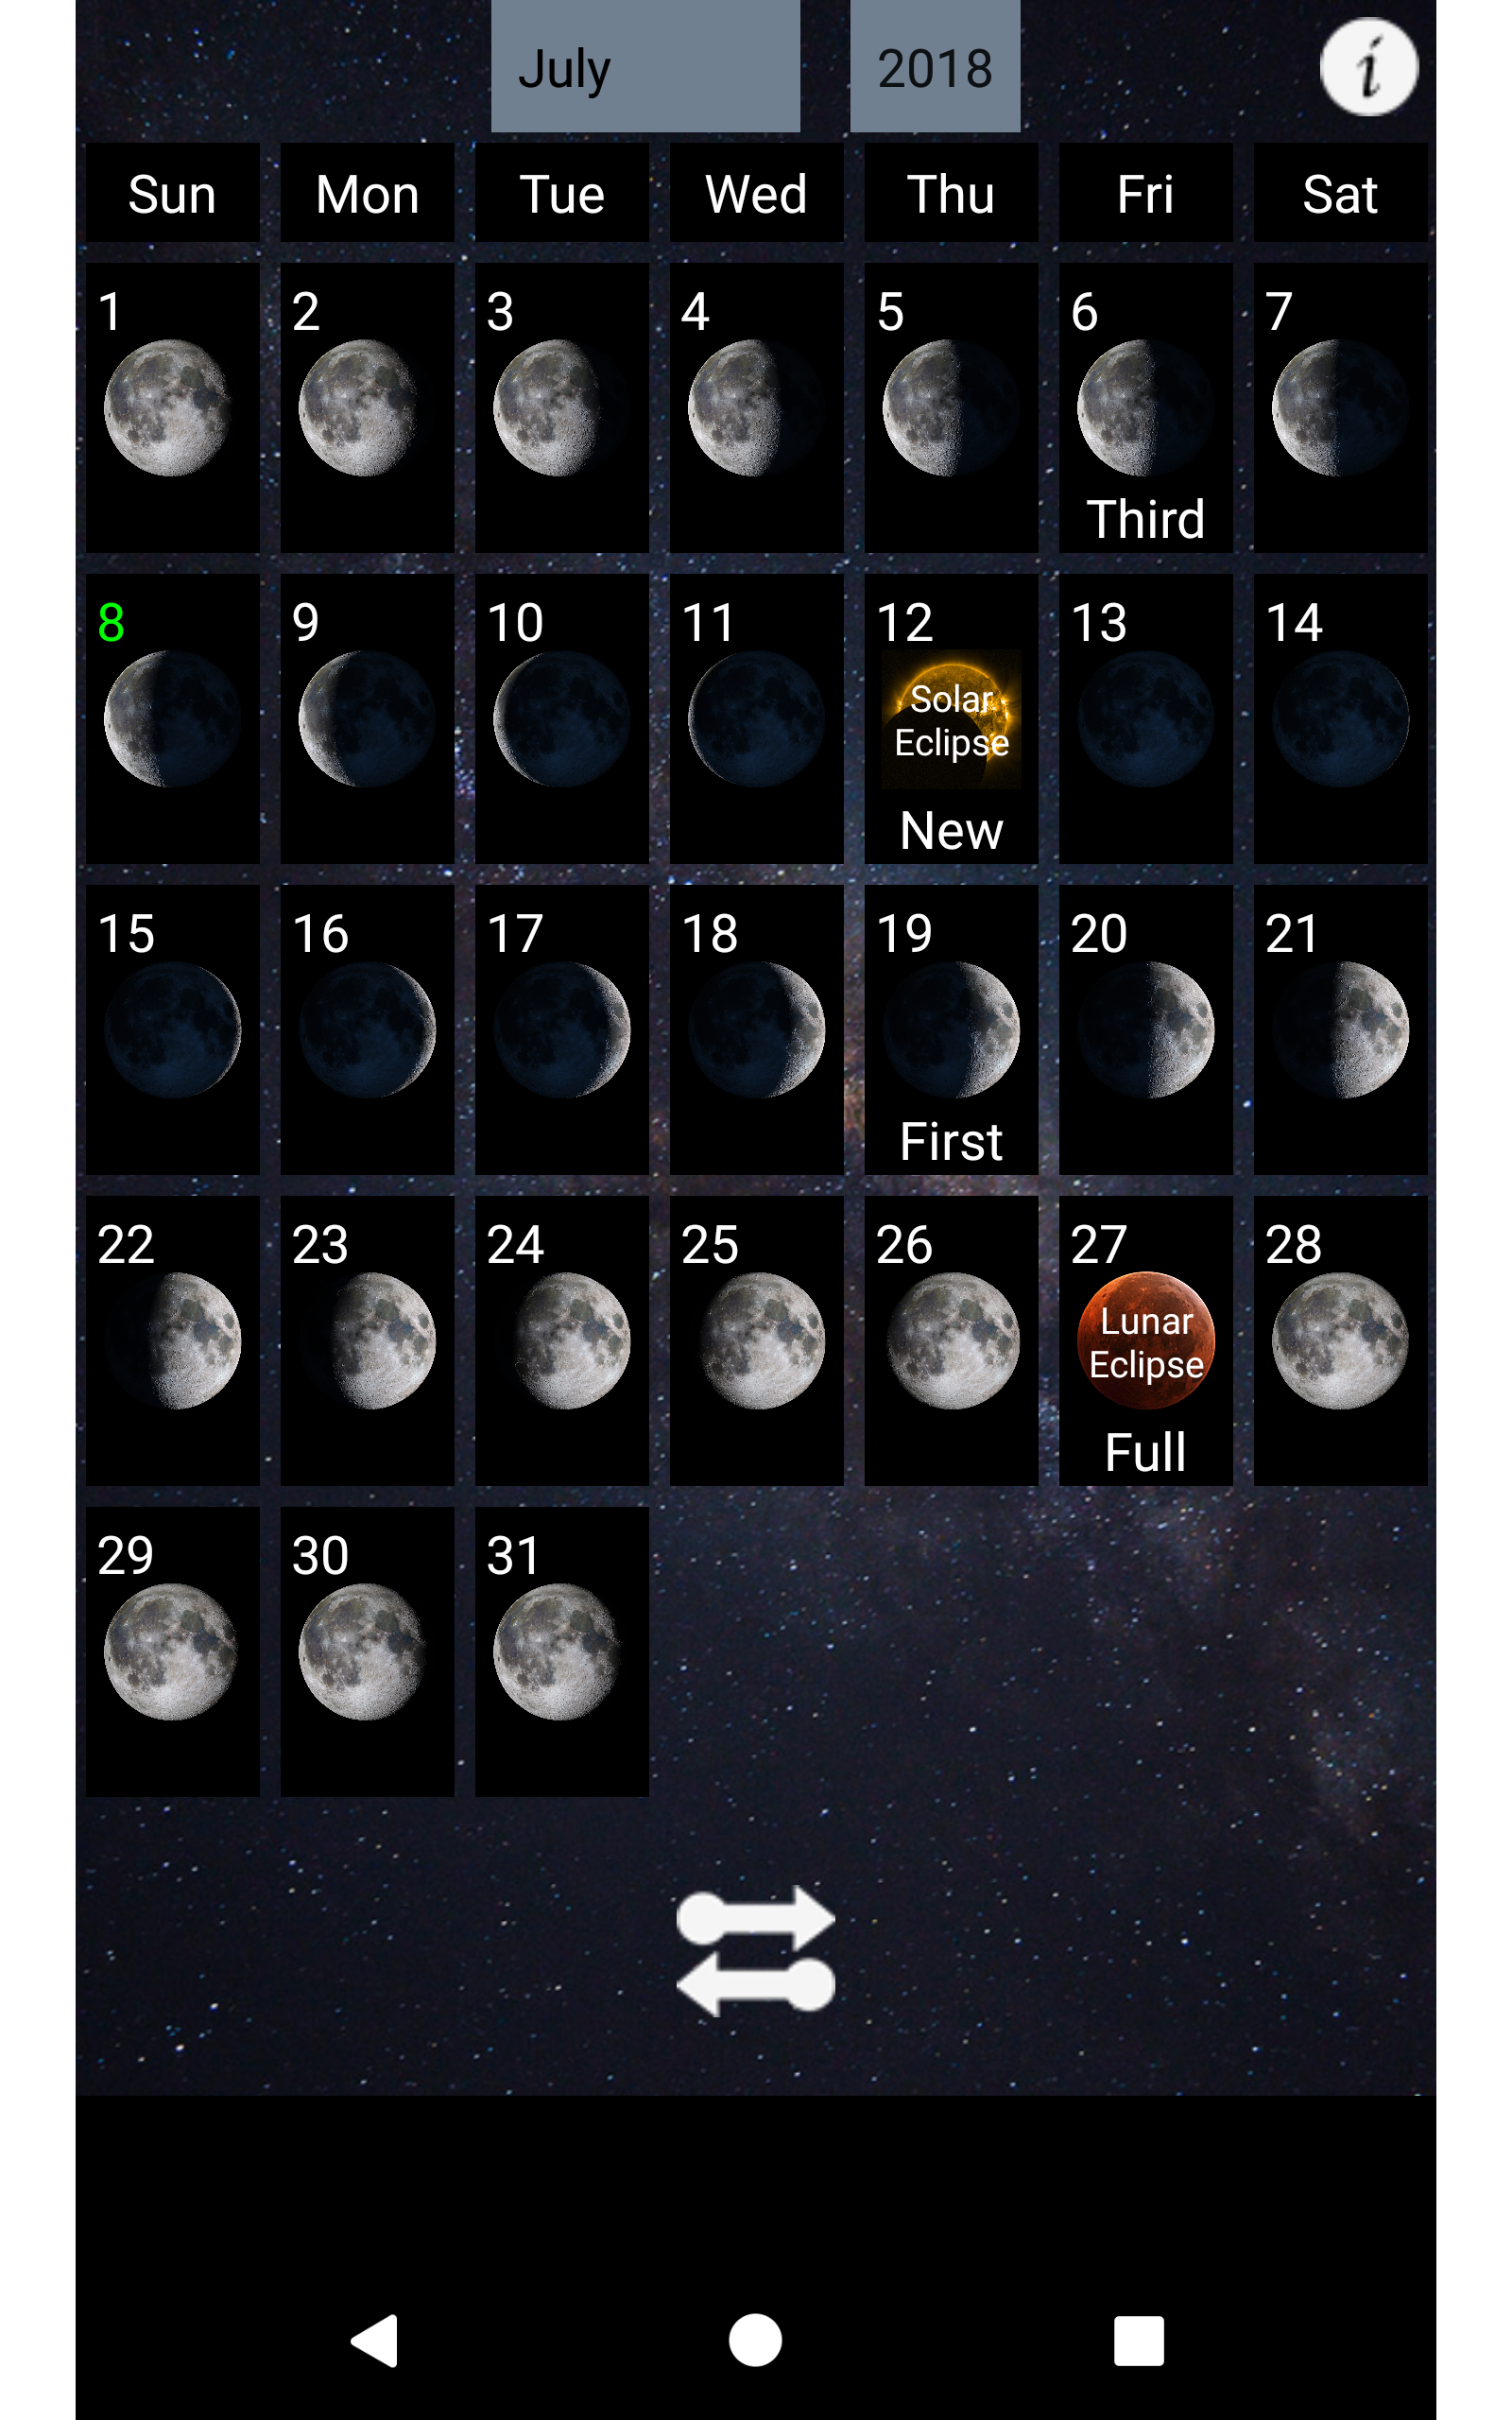 Calendar showing different phases of the moon